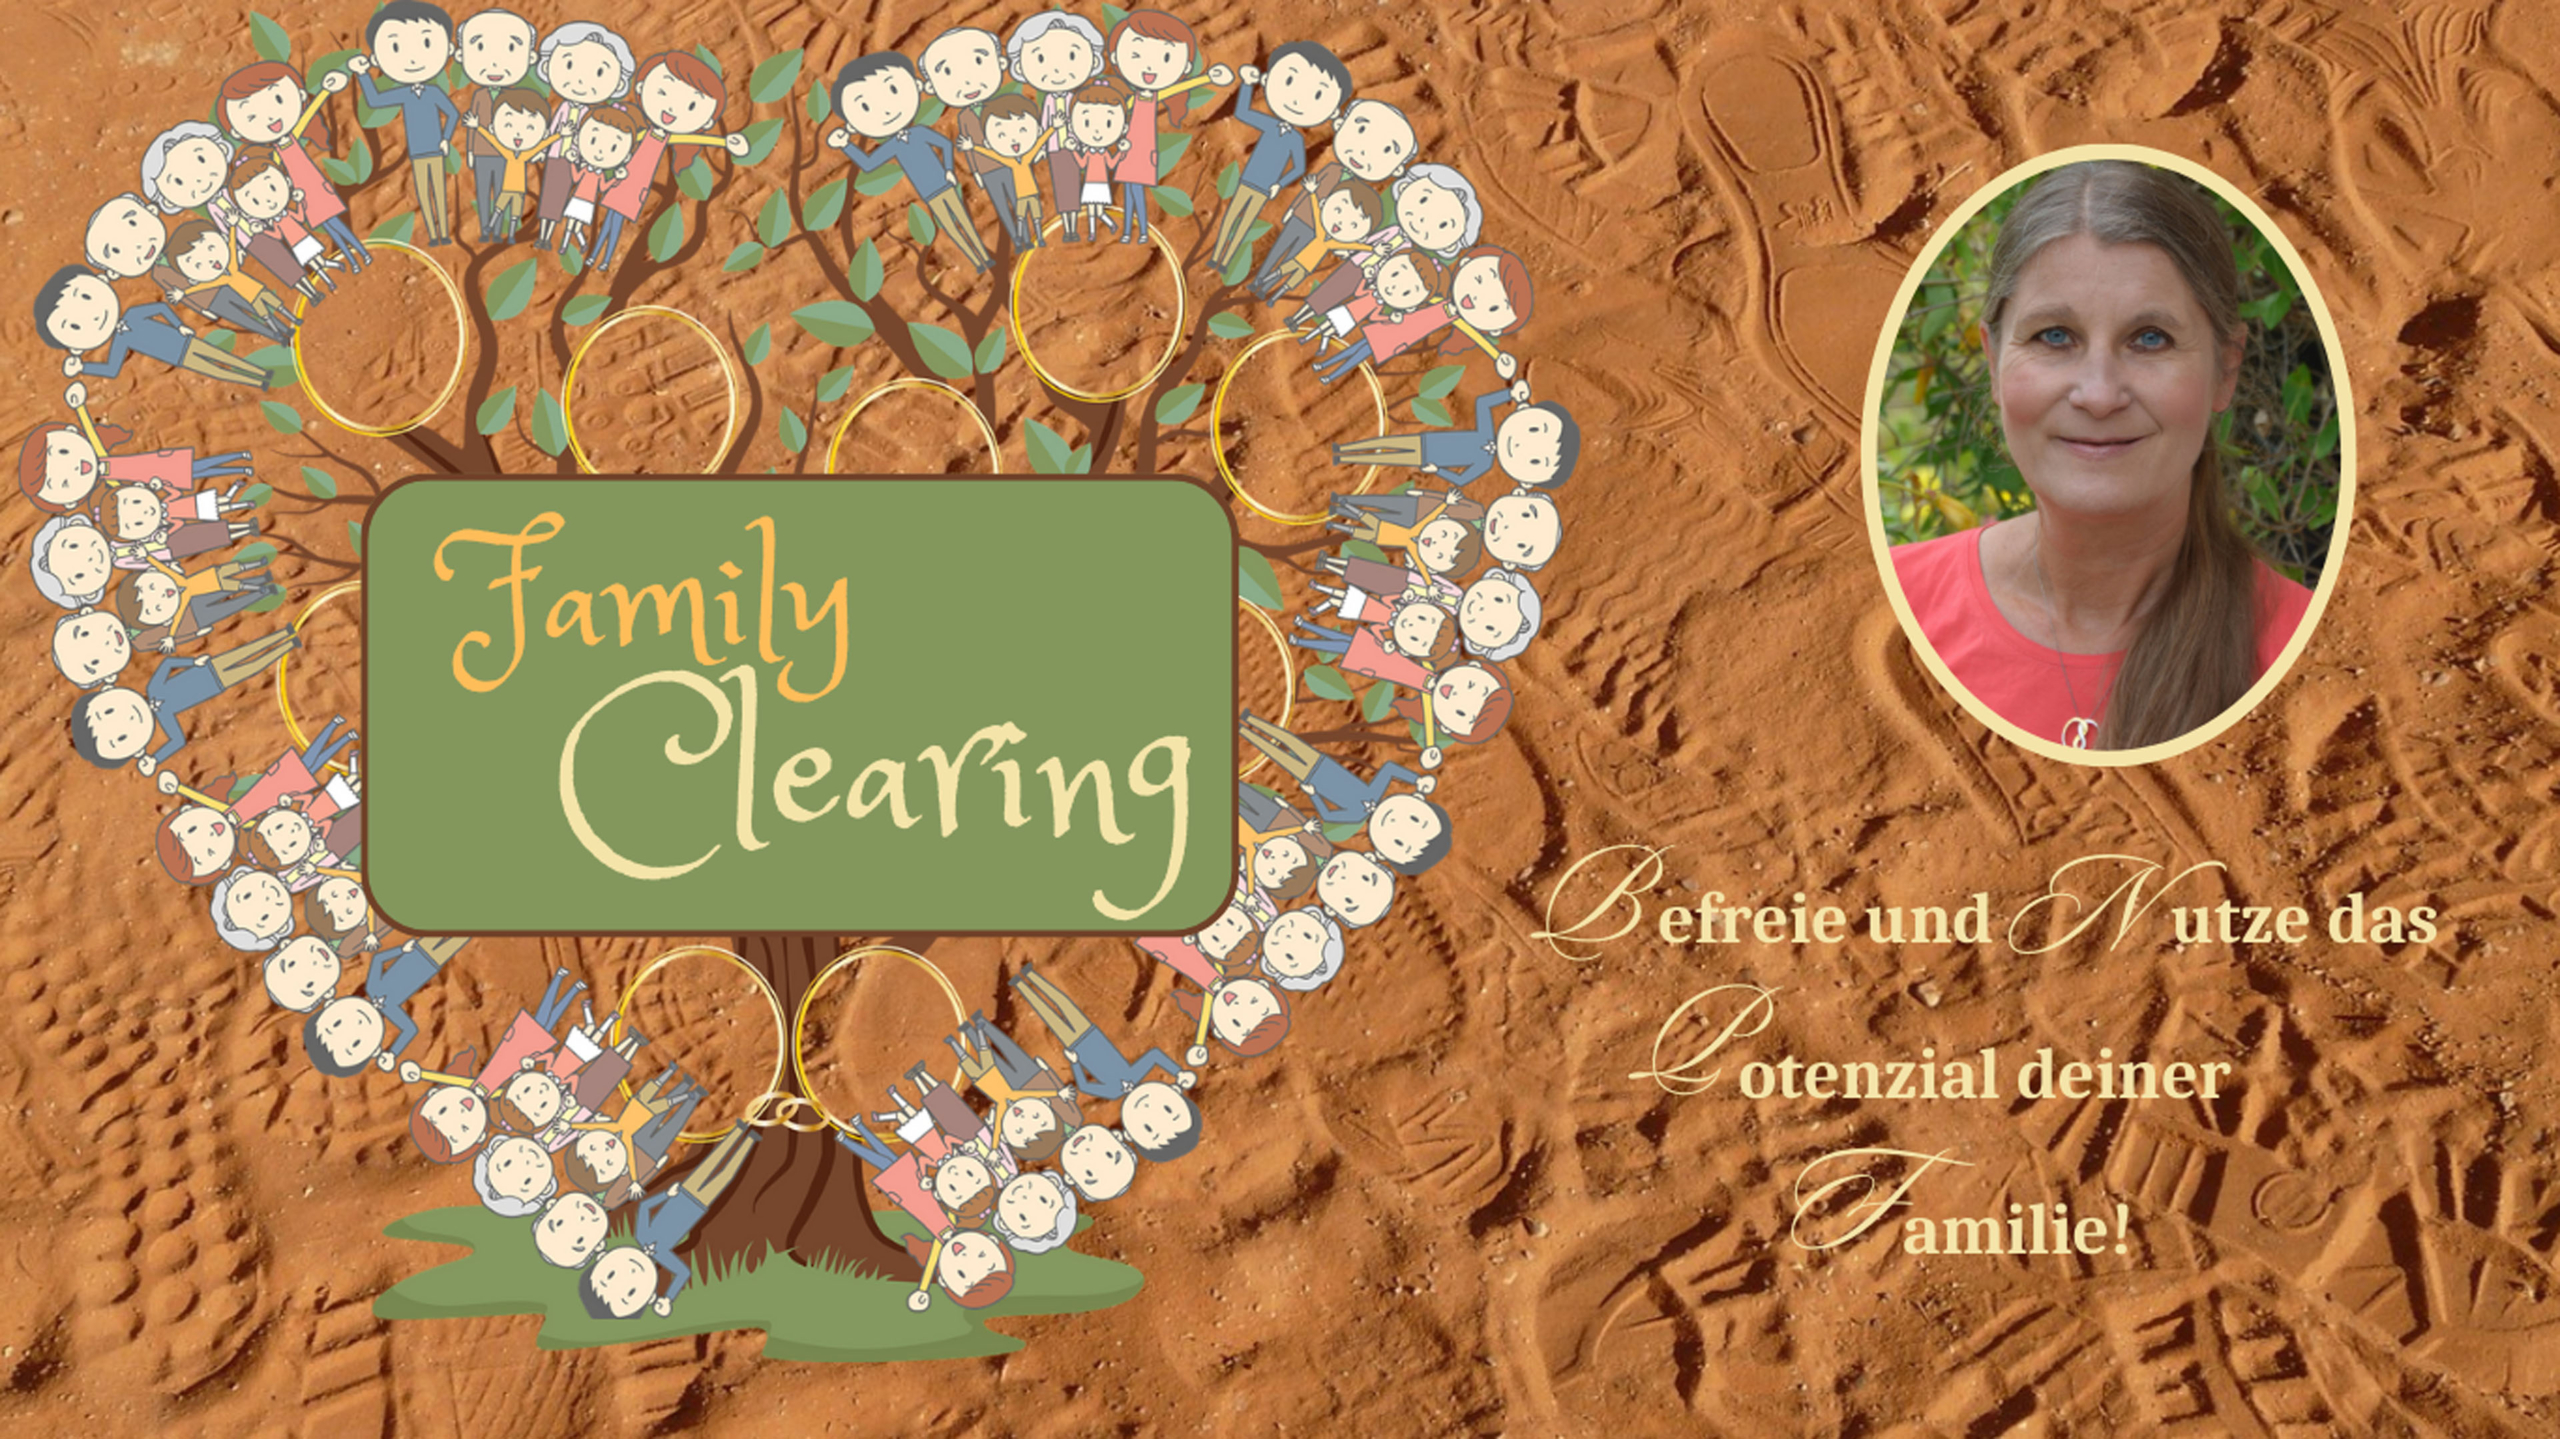 – Family Clearing –